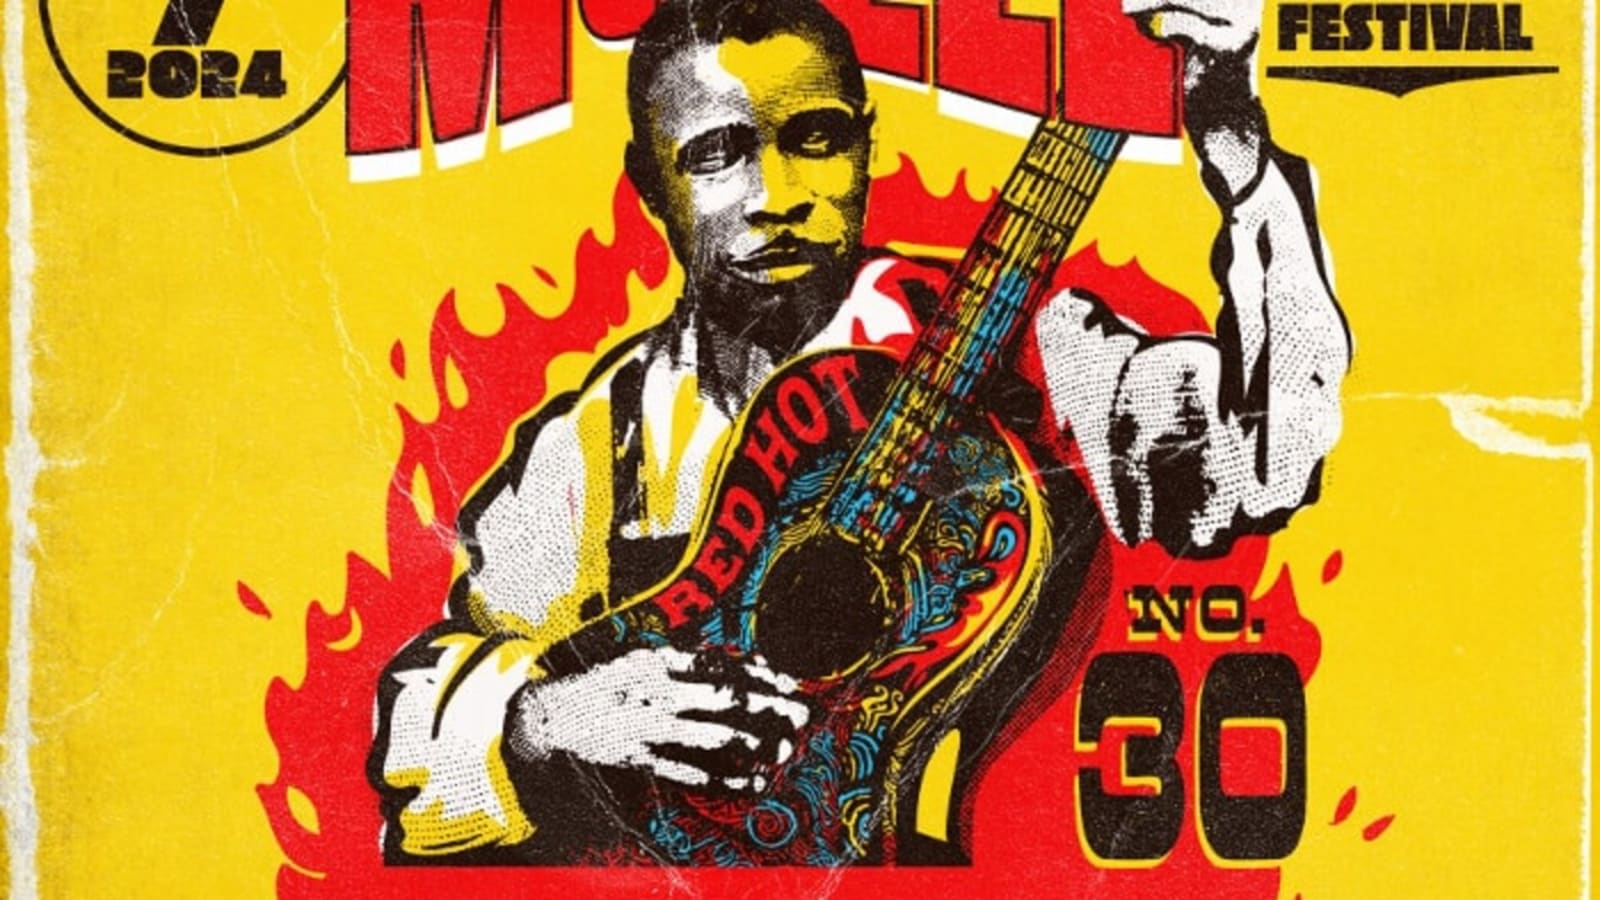 30th Annual Blind Willie McTell Music Festival